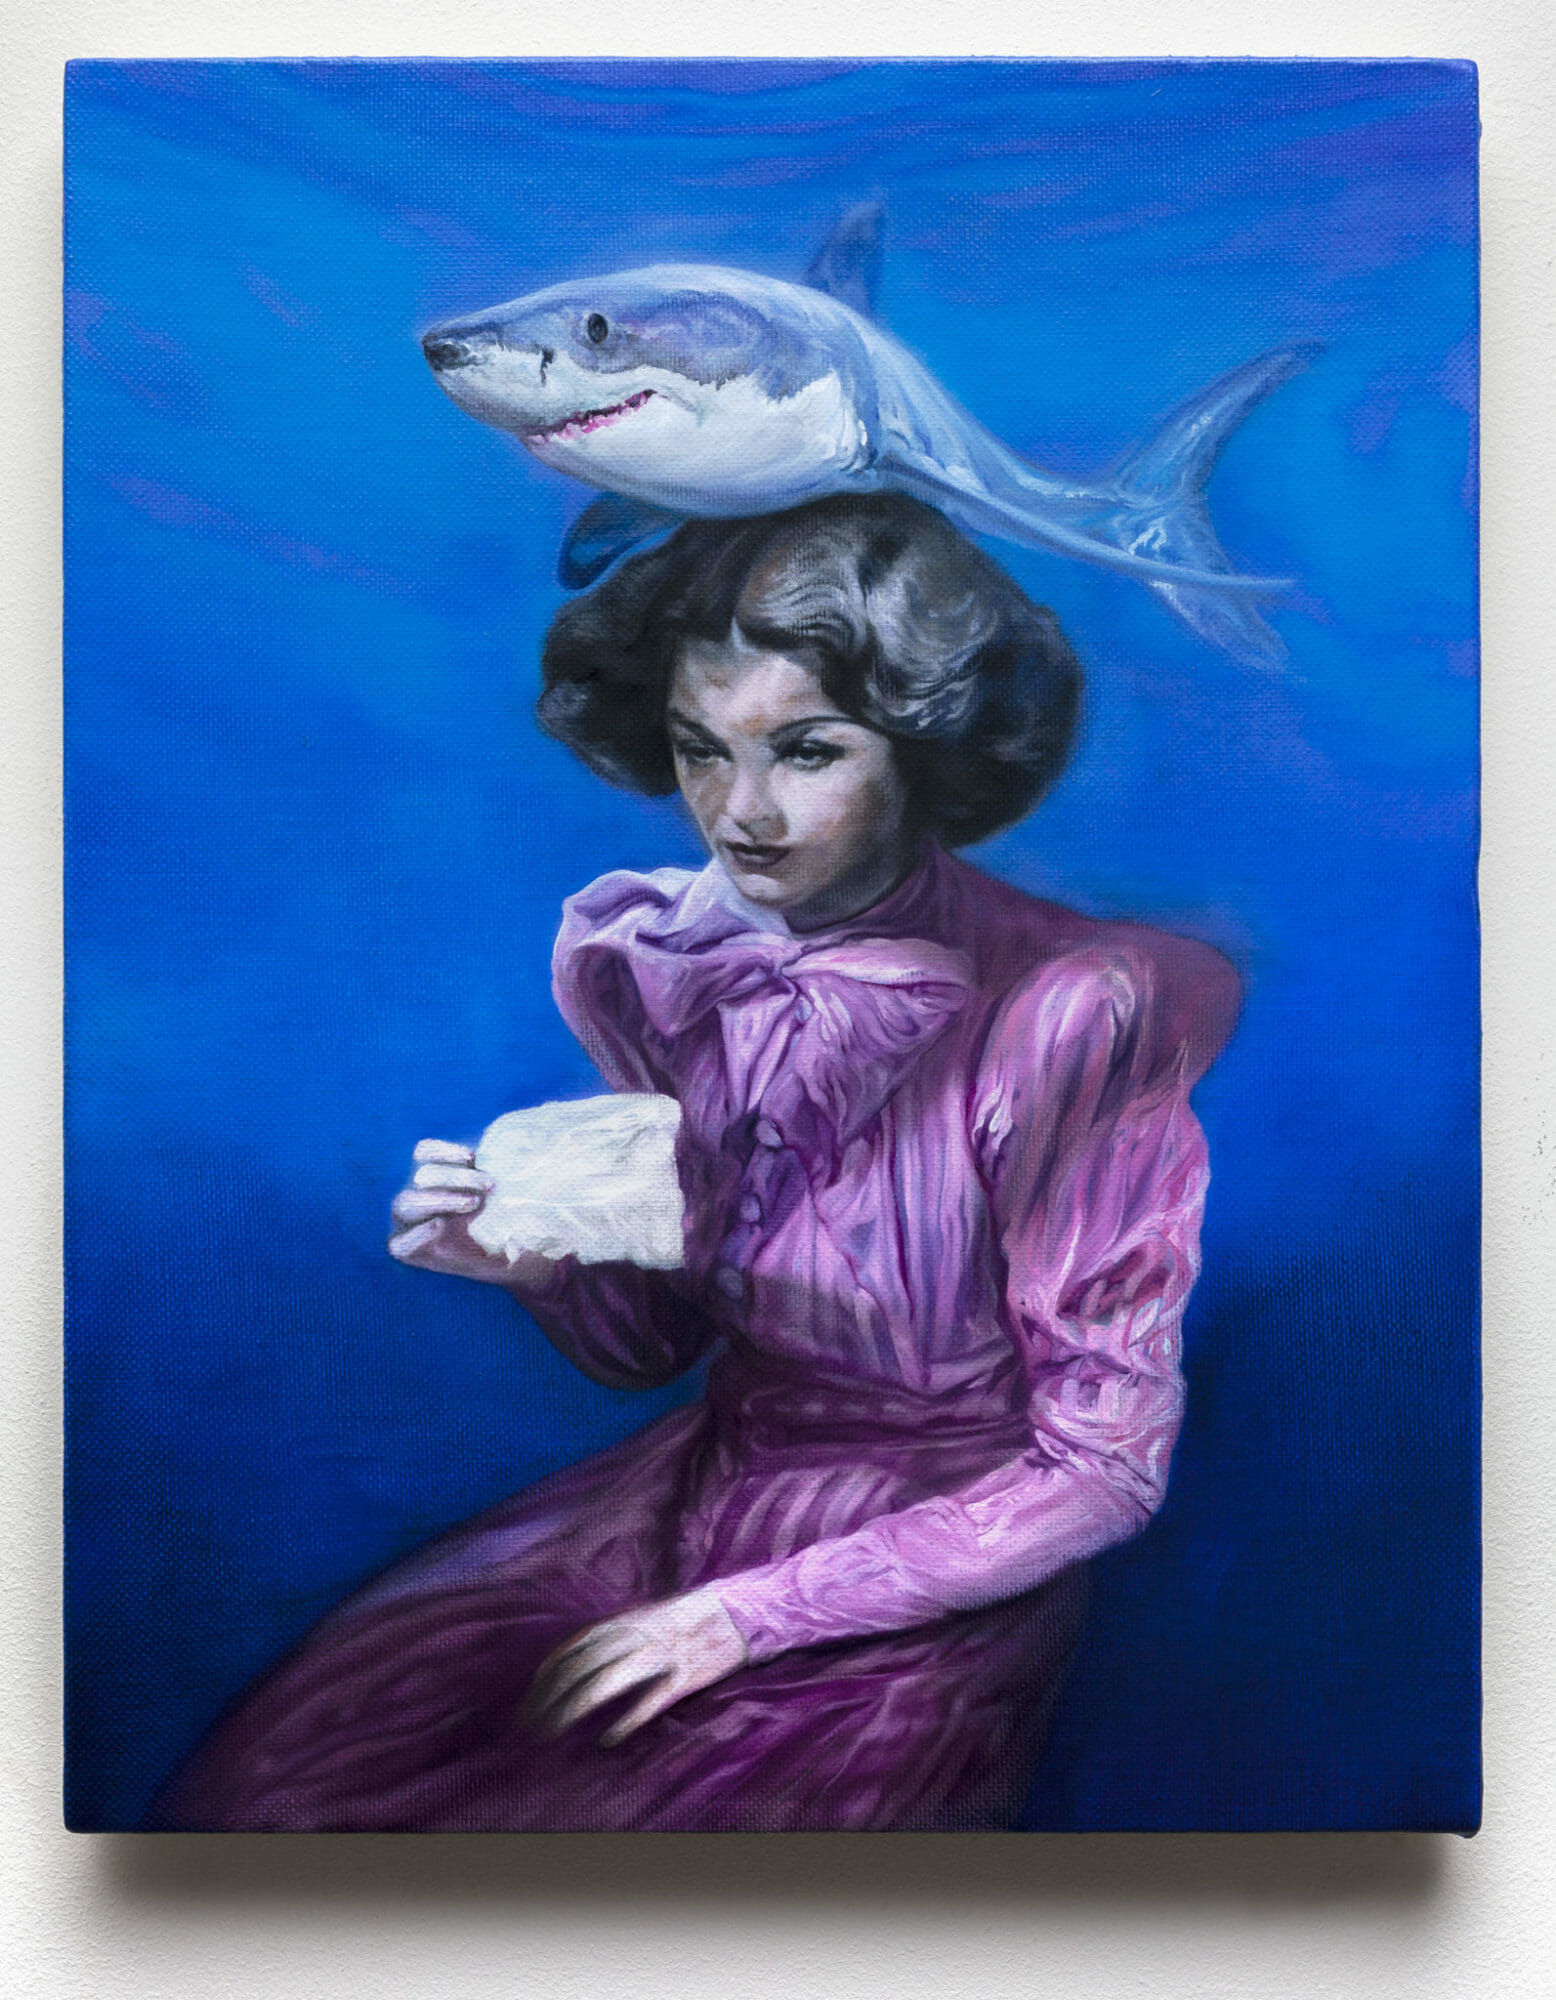 La dame au requin - Oil on canvas mounted on wood - 30 x 40 cm _ 2020 